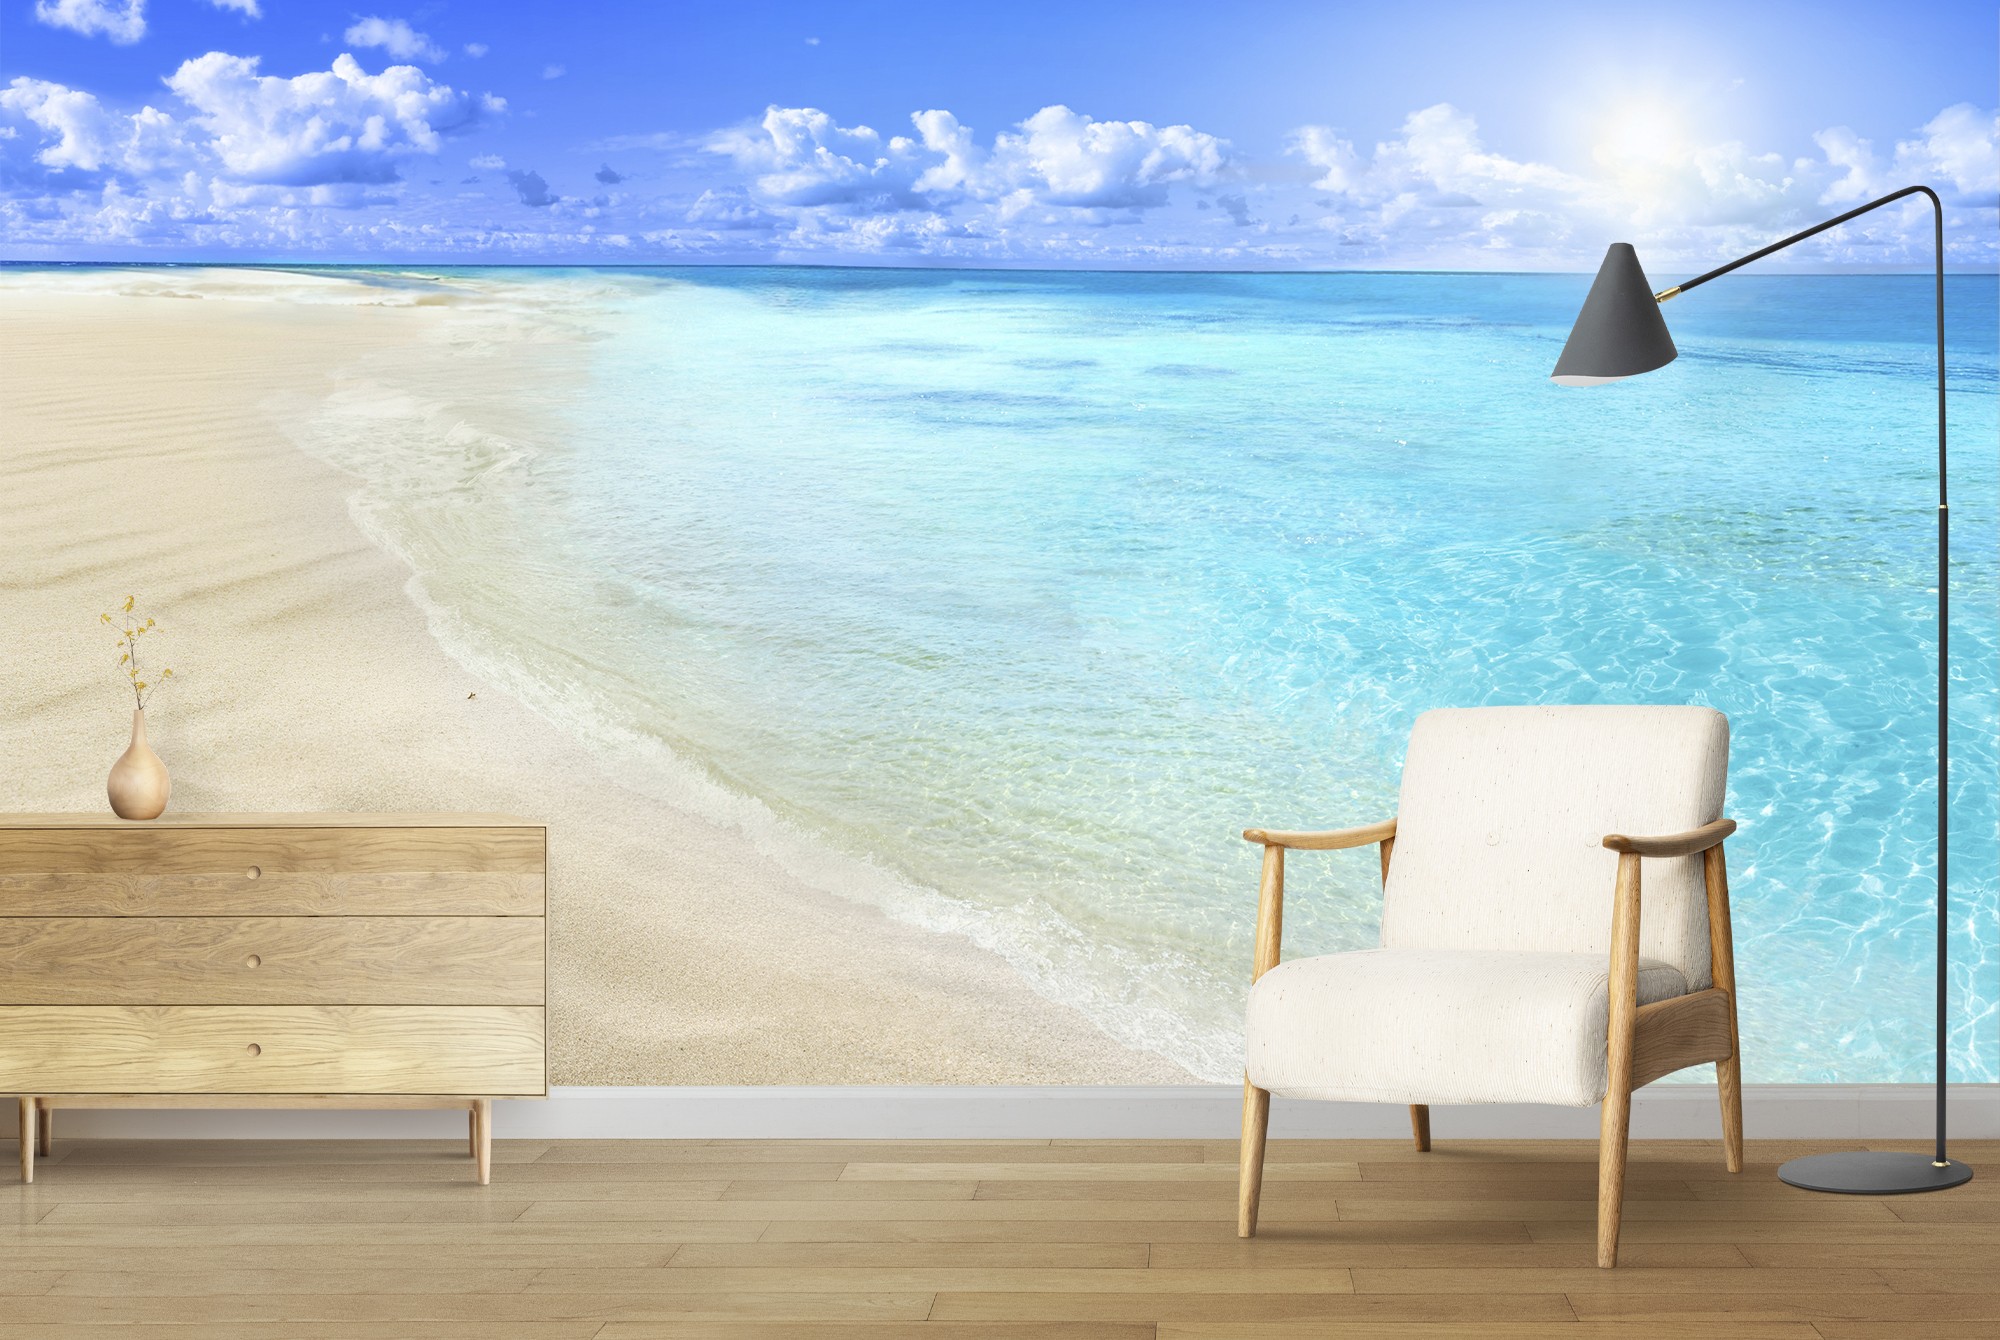 NON WOVEN giant wallpaper 368x248cm bedroom wall mural Morning in paradise beach 